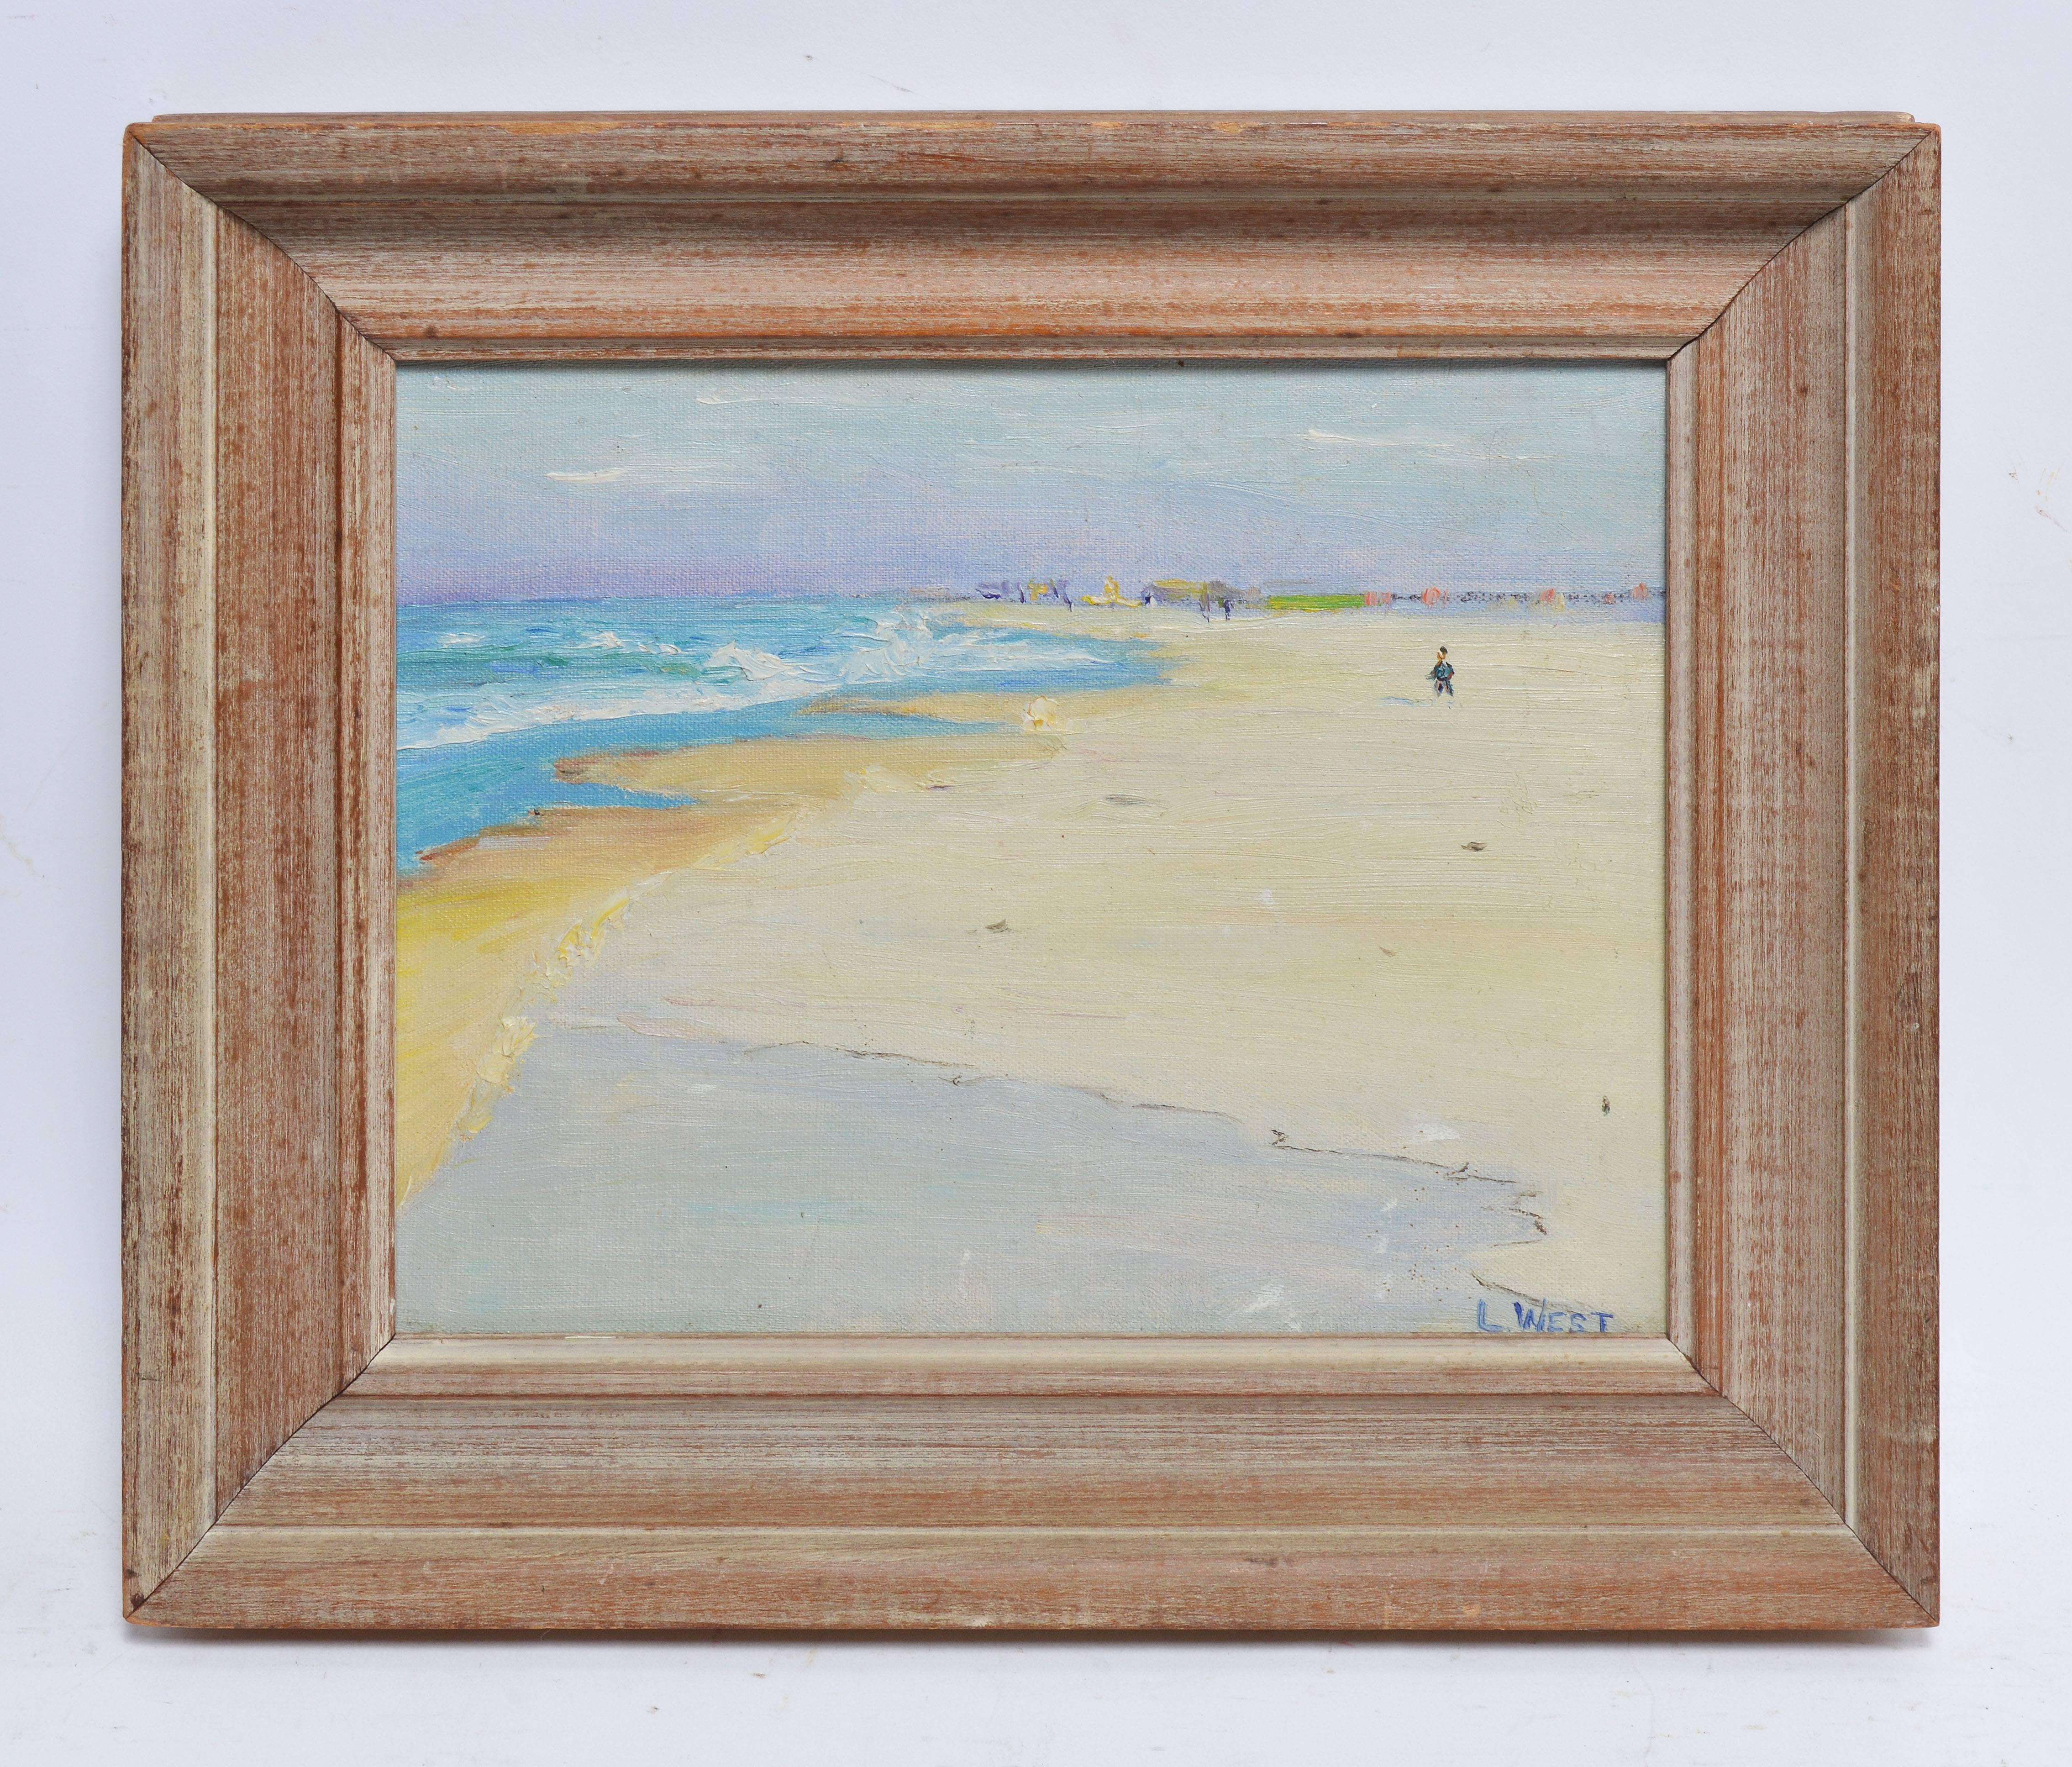 Impressionist view of beach with figures by Louise West.  Oil on board, circa 1920.  Signed.  Displayed in a greywood frame.  Image size, 10